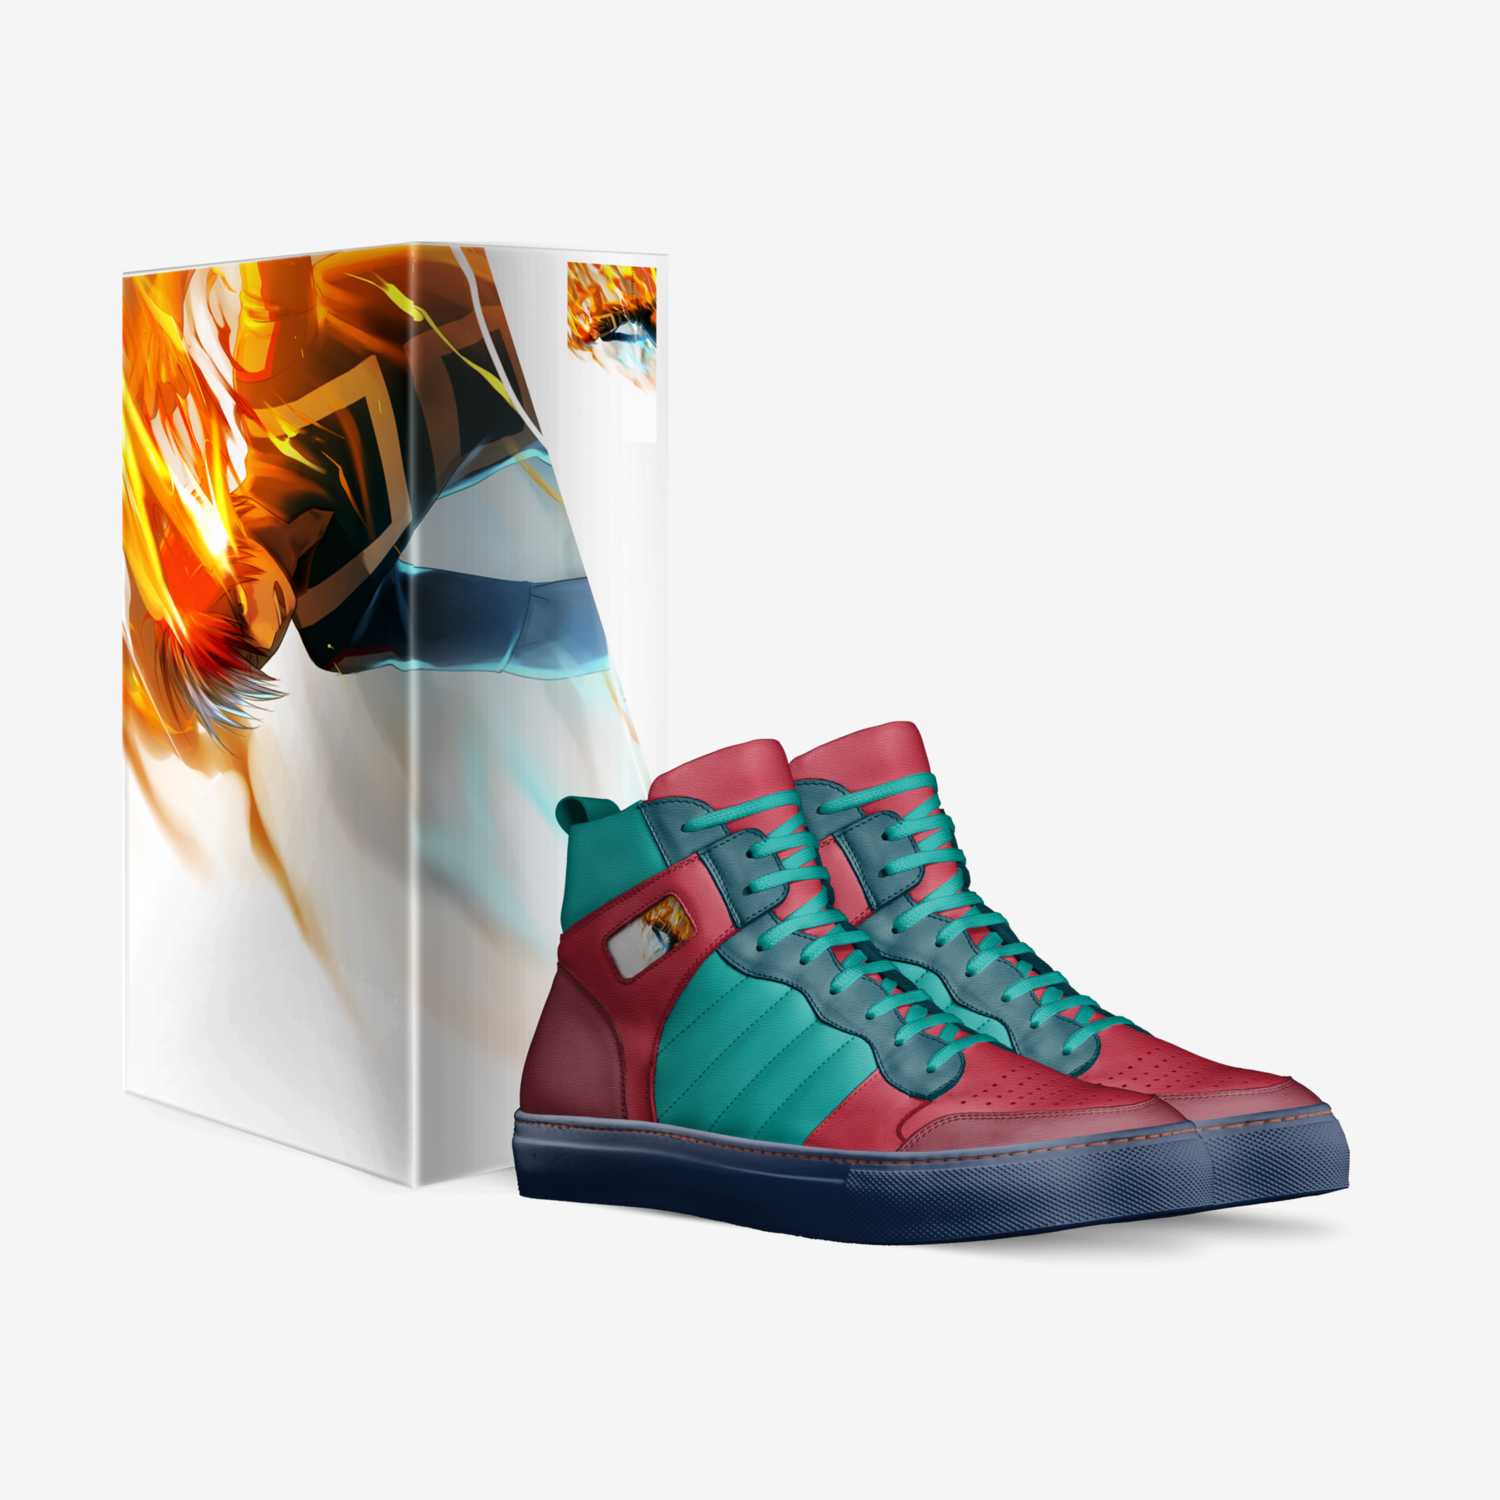 Bakugo custom made in Italy shoes by Leet | Box view